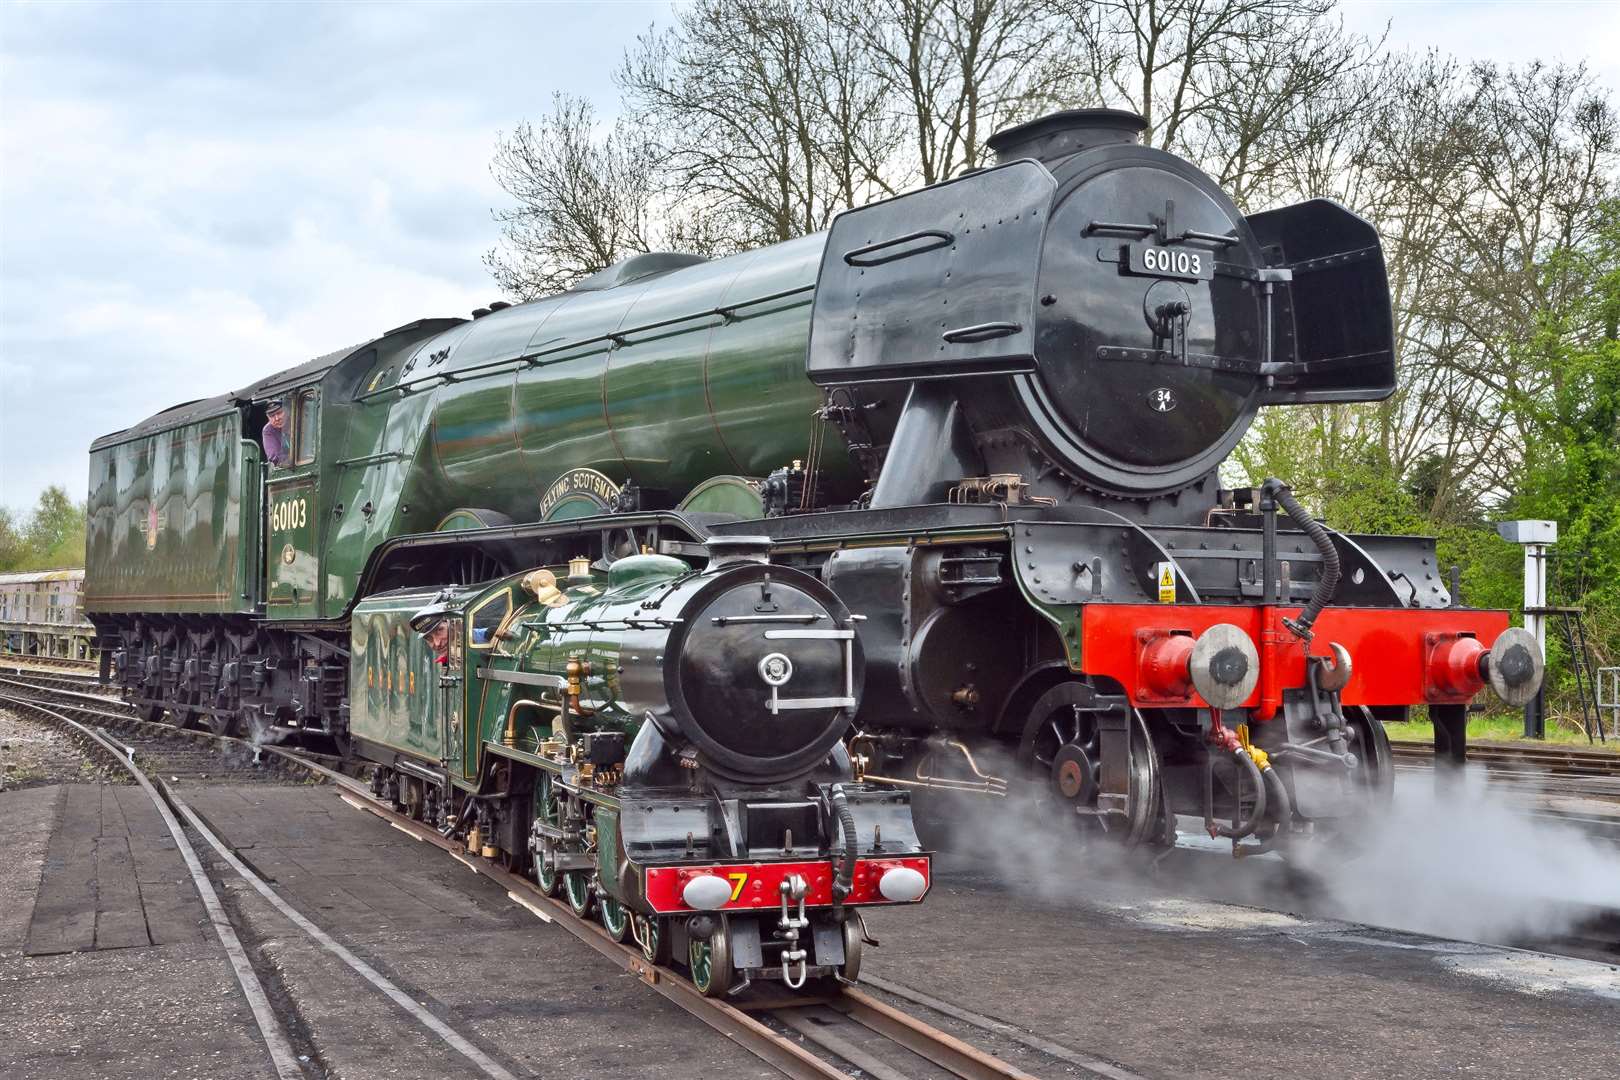 The two legends of steam were reunited at the Bluebell Railway in East Sussex. Picture: Steve Town/Romney Hythe and Dymchurch Railway